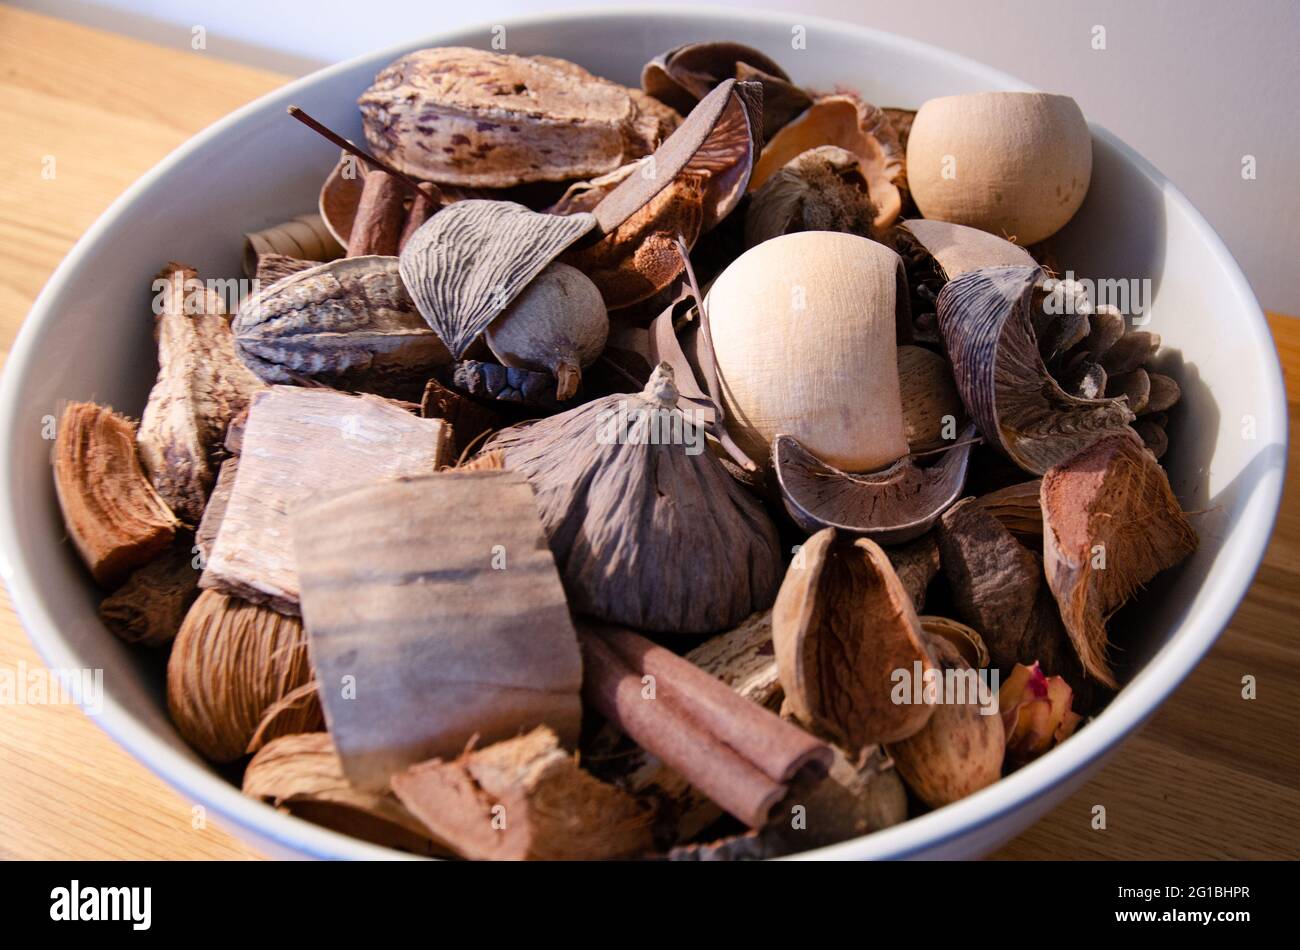 A decorative dish of potpourri with earthy brown tones. Stock Photo